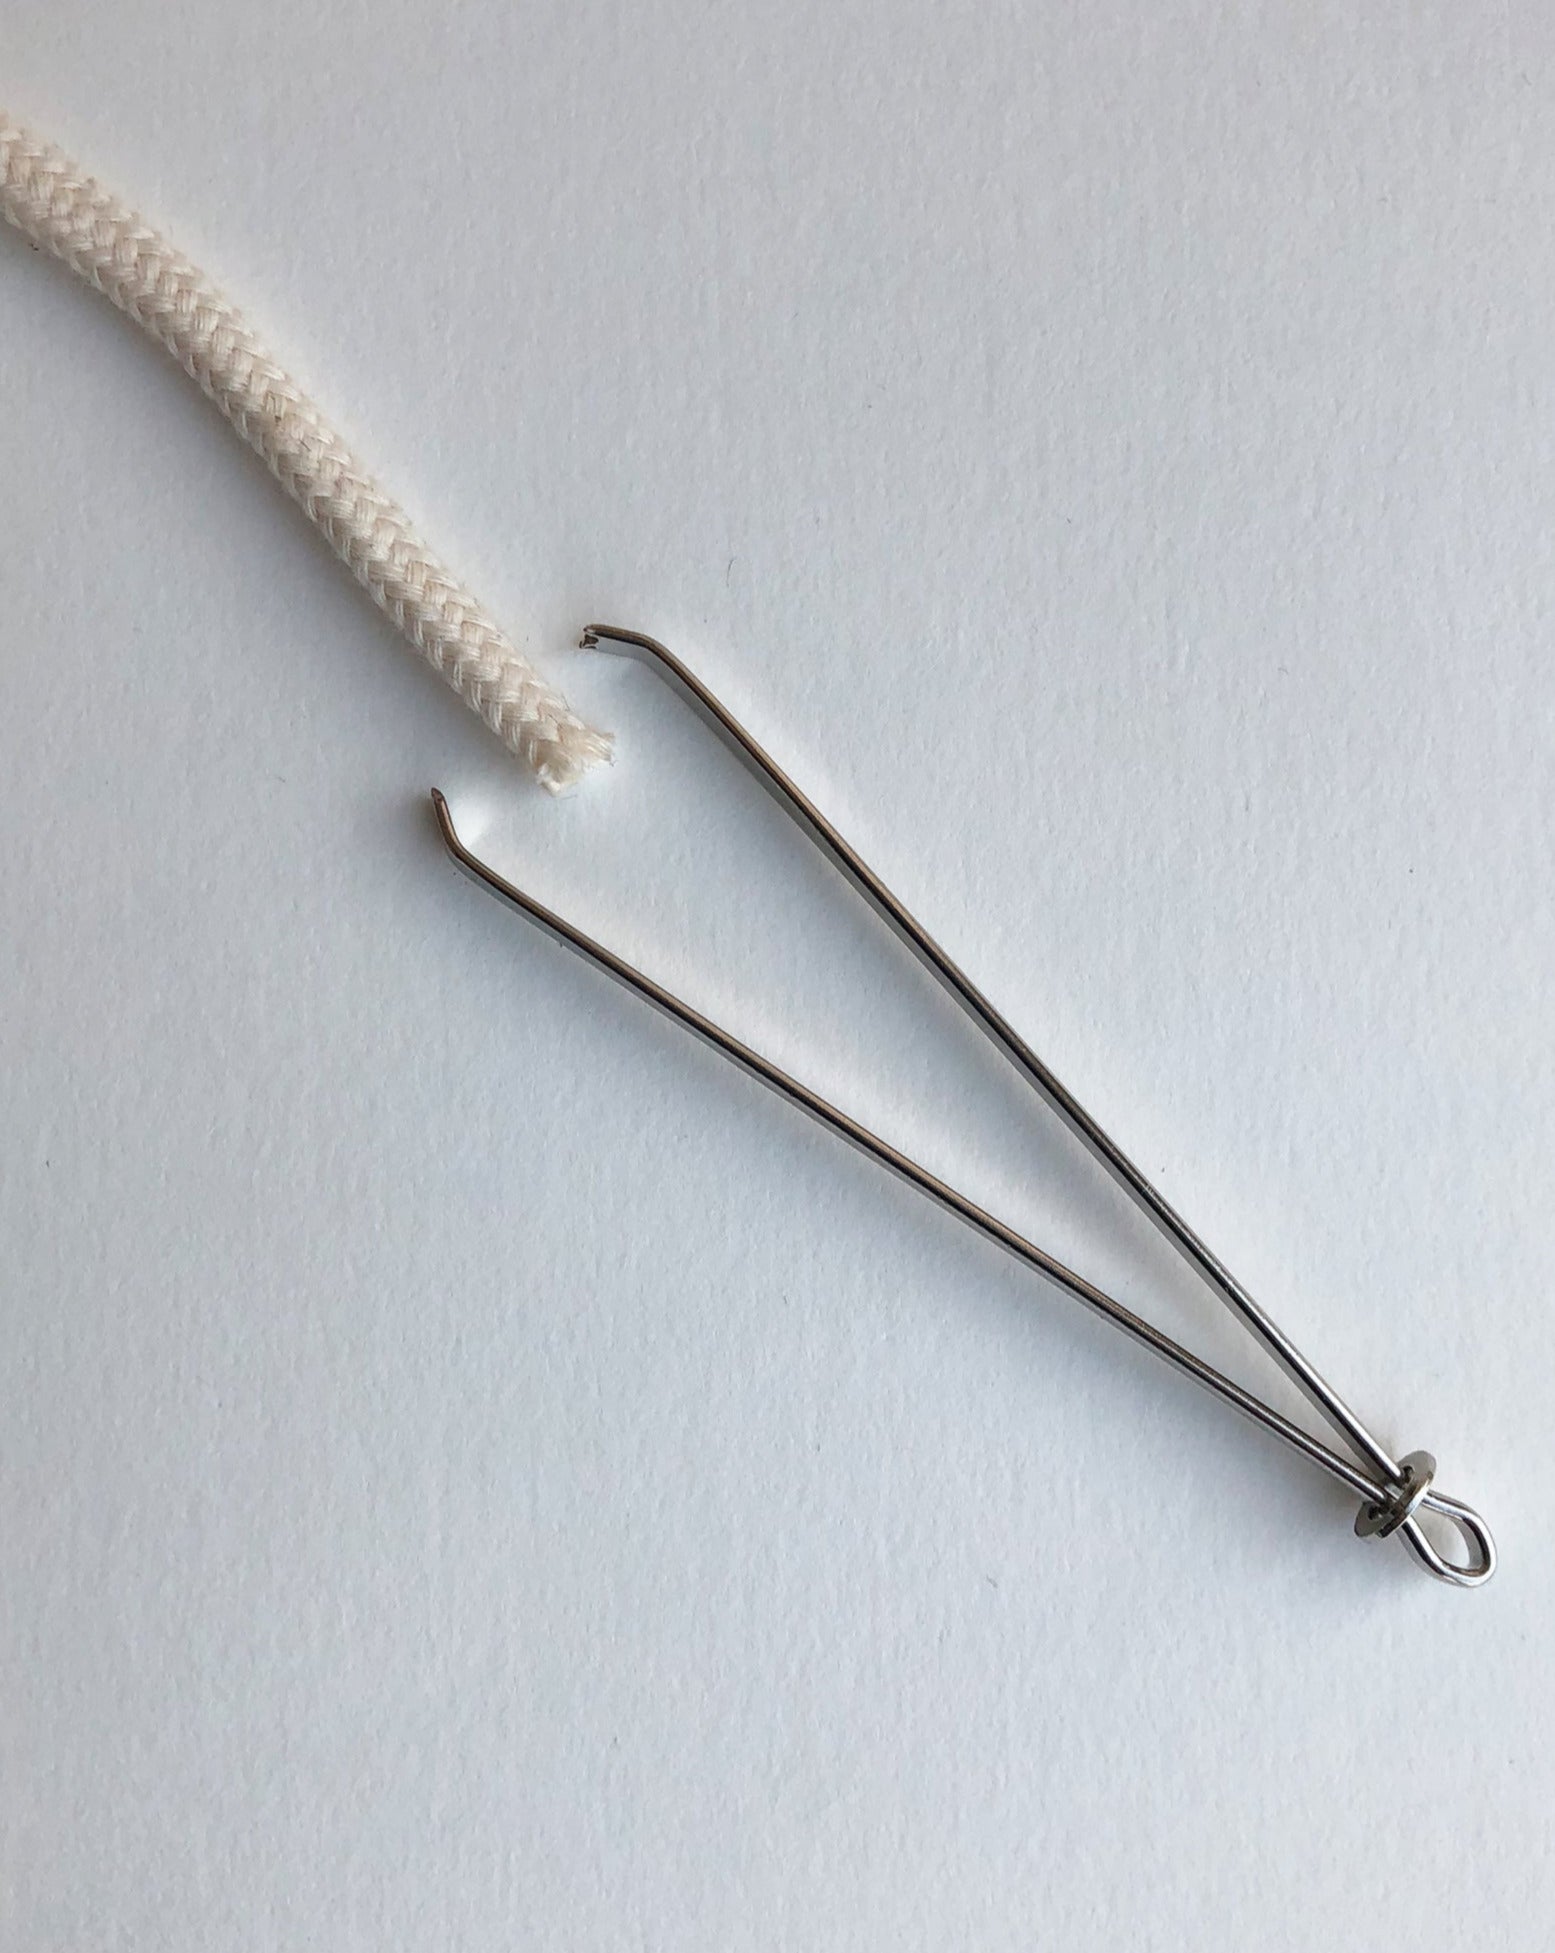 A bodkin will be opened and closed by sliding a little metal ring. Open to insert a string or ruber band, close to secure them in between tweezers, then the bodkin will be threaded the casing.